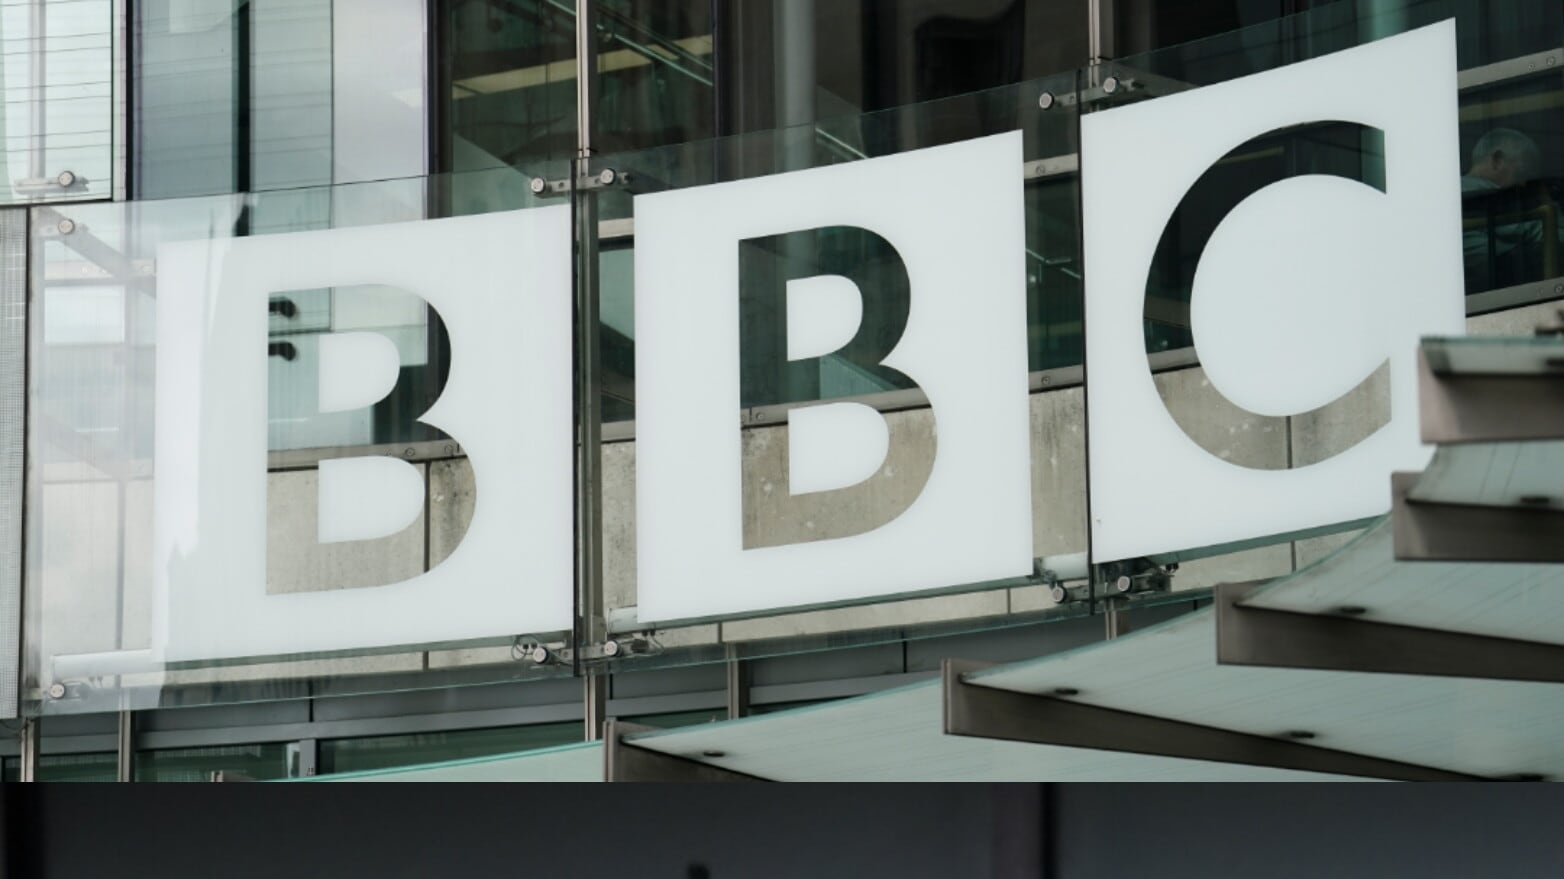 Both of the UK and Ireland's public service broadcasters are dealing with scandals involving high-profile presenters.